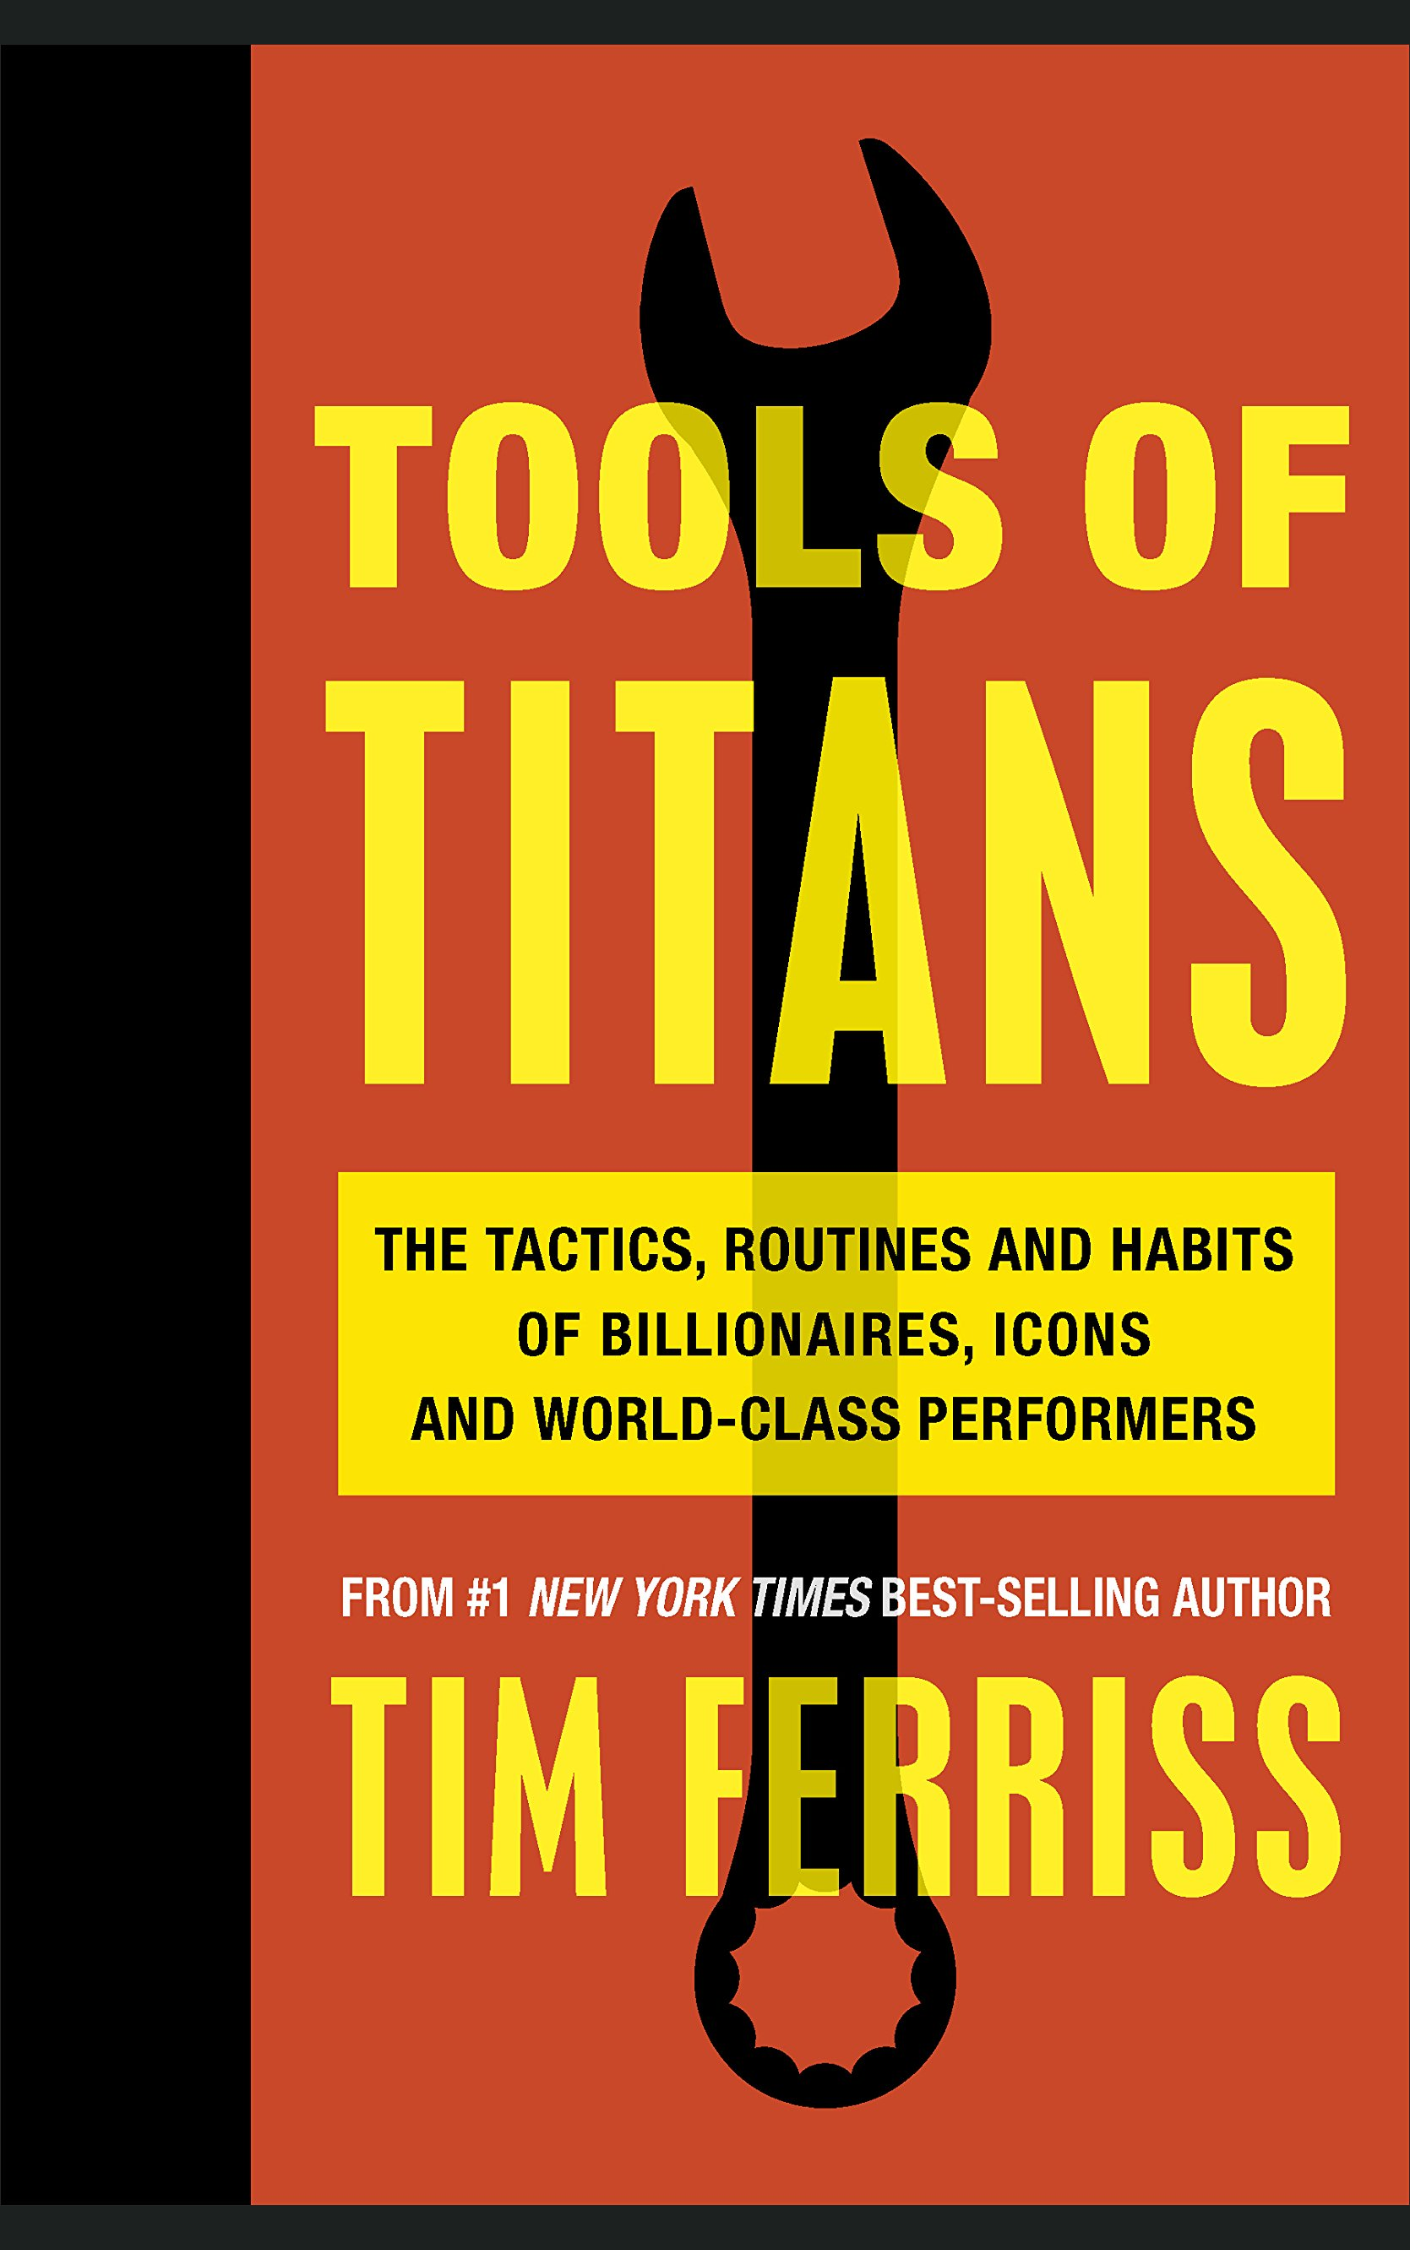 TOOLS OF TITANS by TIM FERRISS